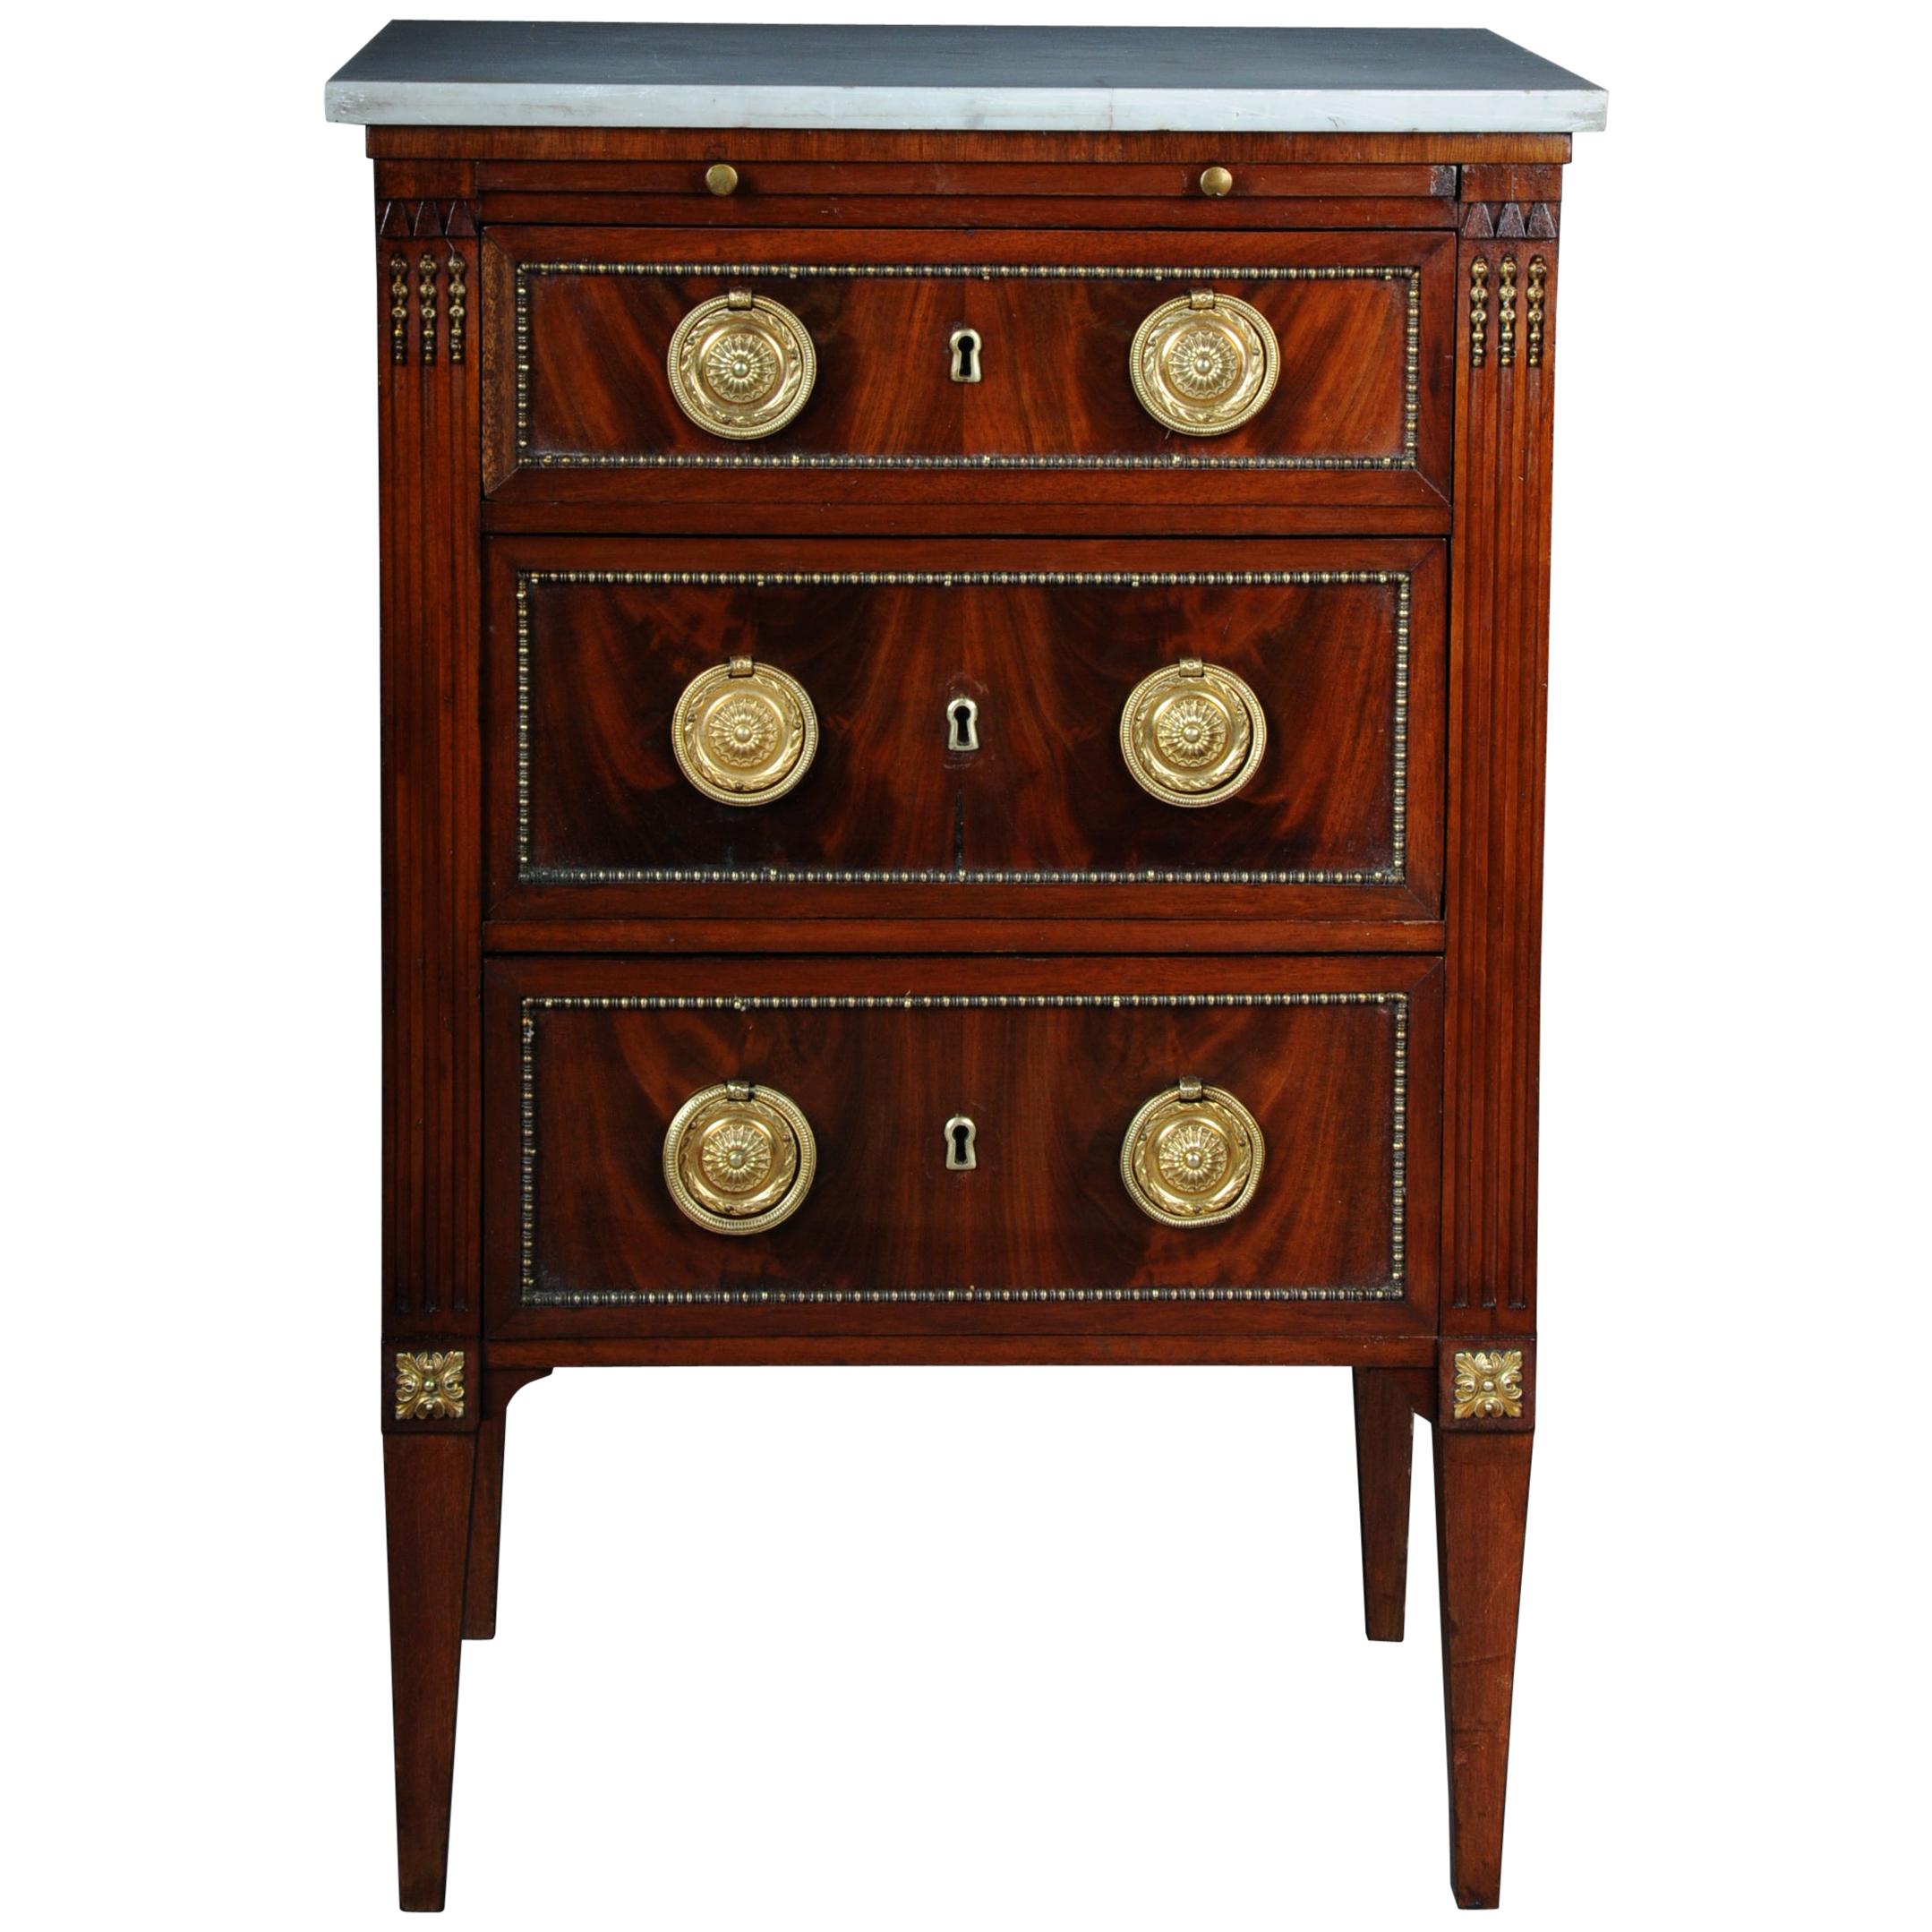 19th Century Classicism Chest of Drawers Louis XVI